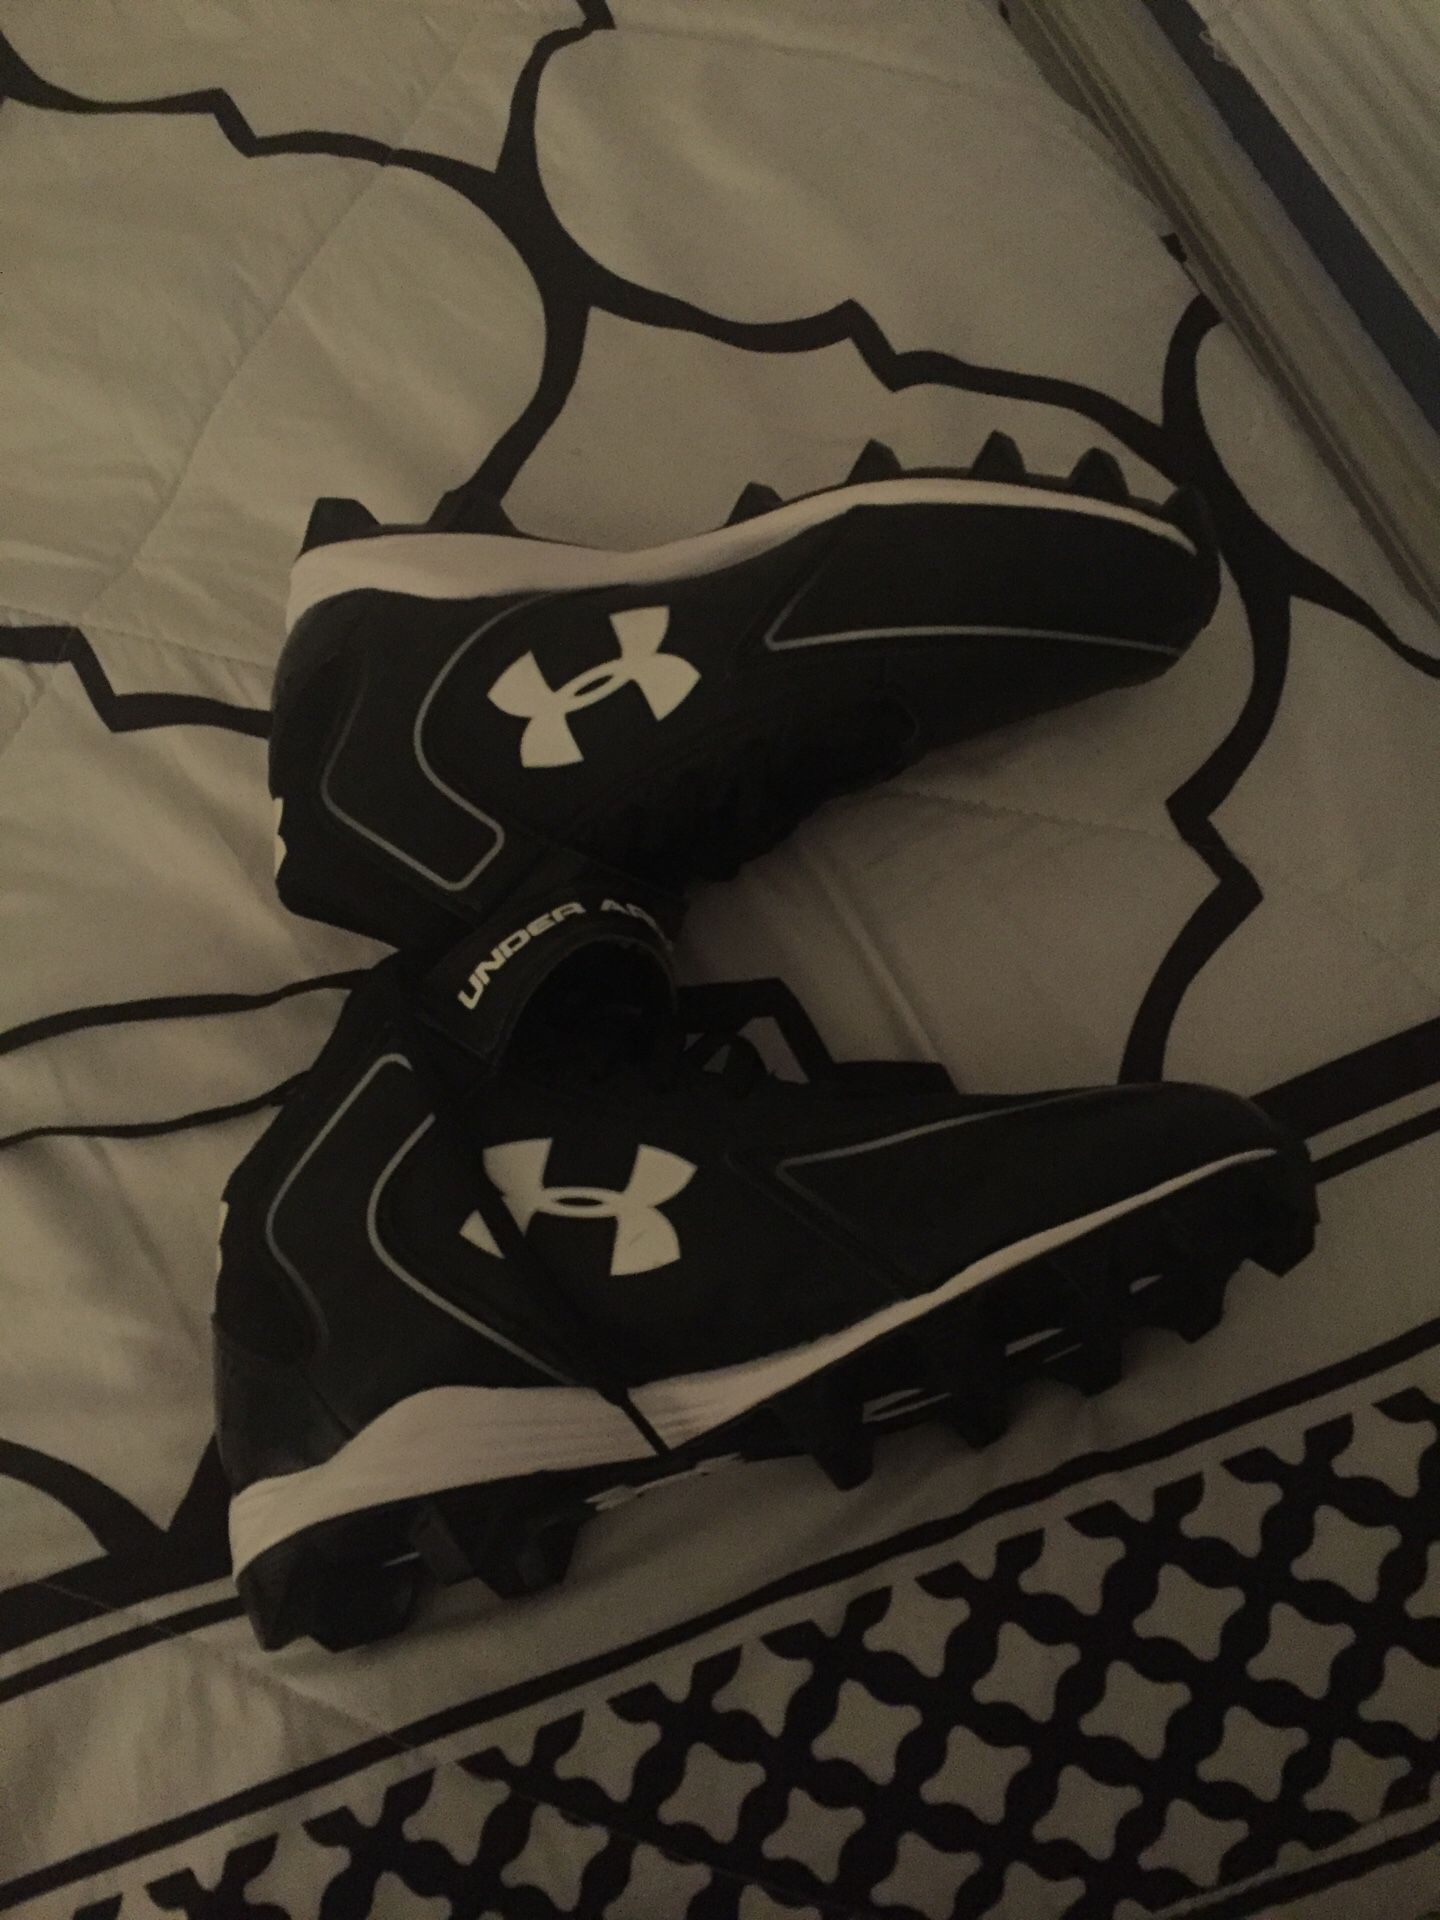 Under armor foot ball cleats size 9